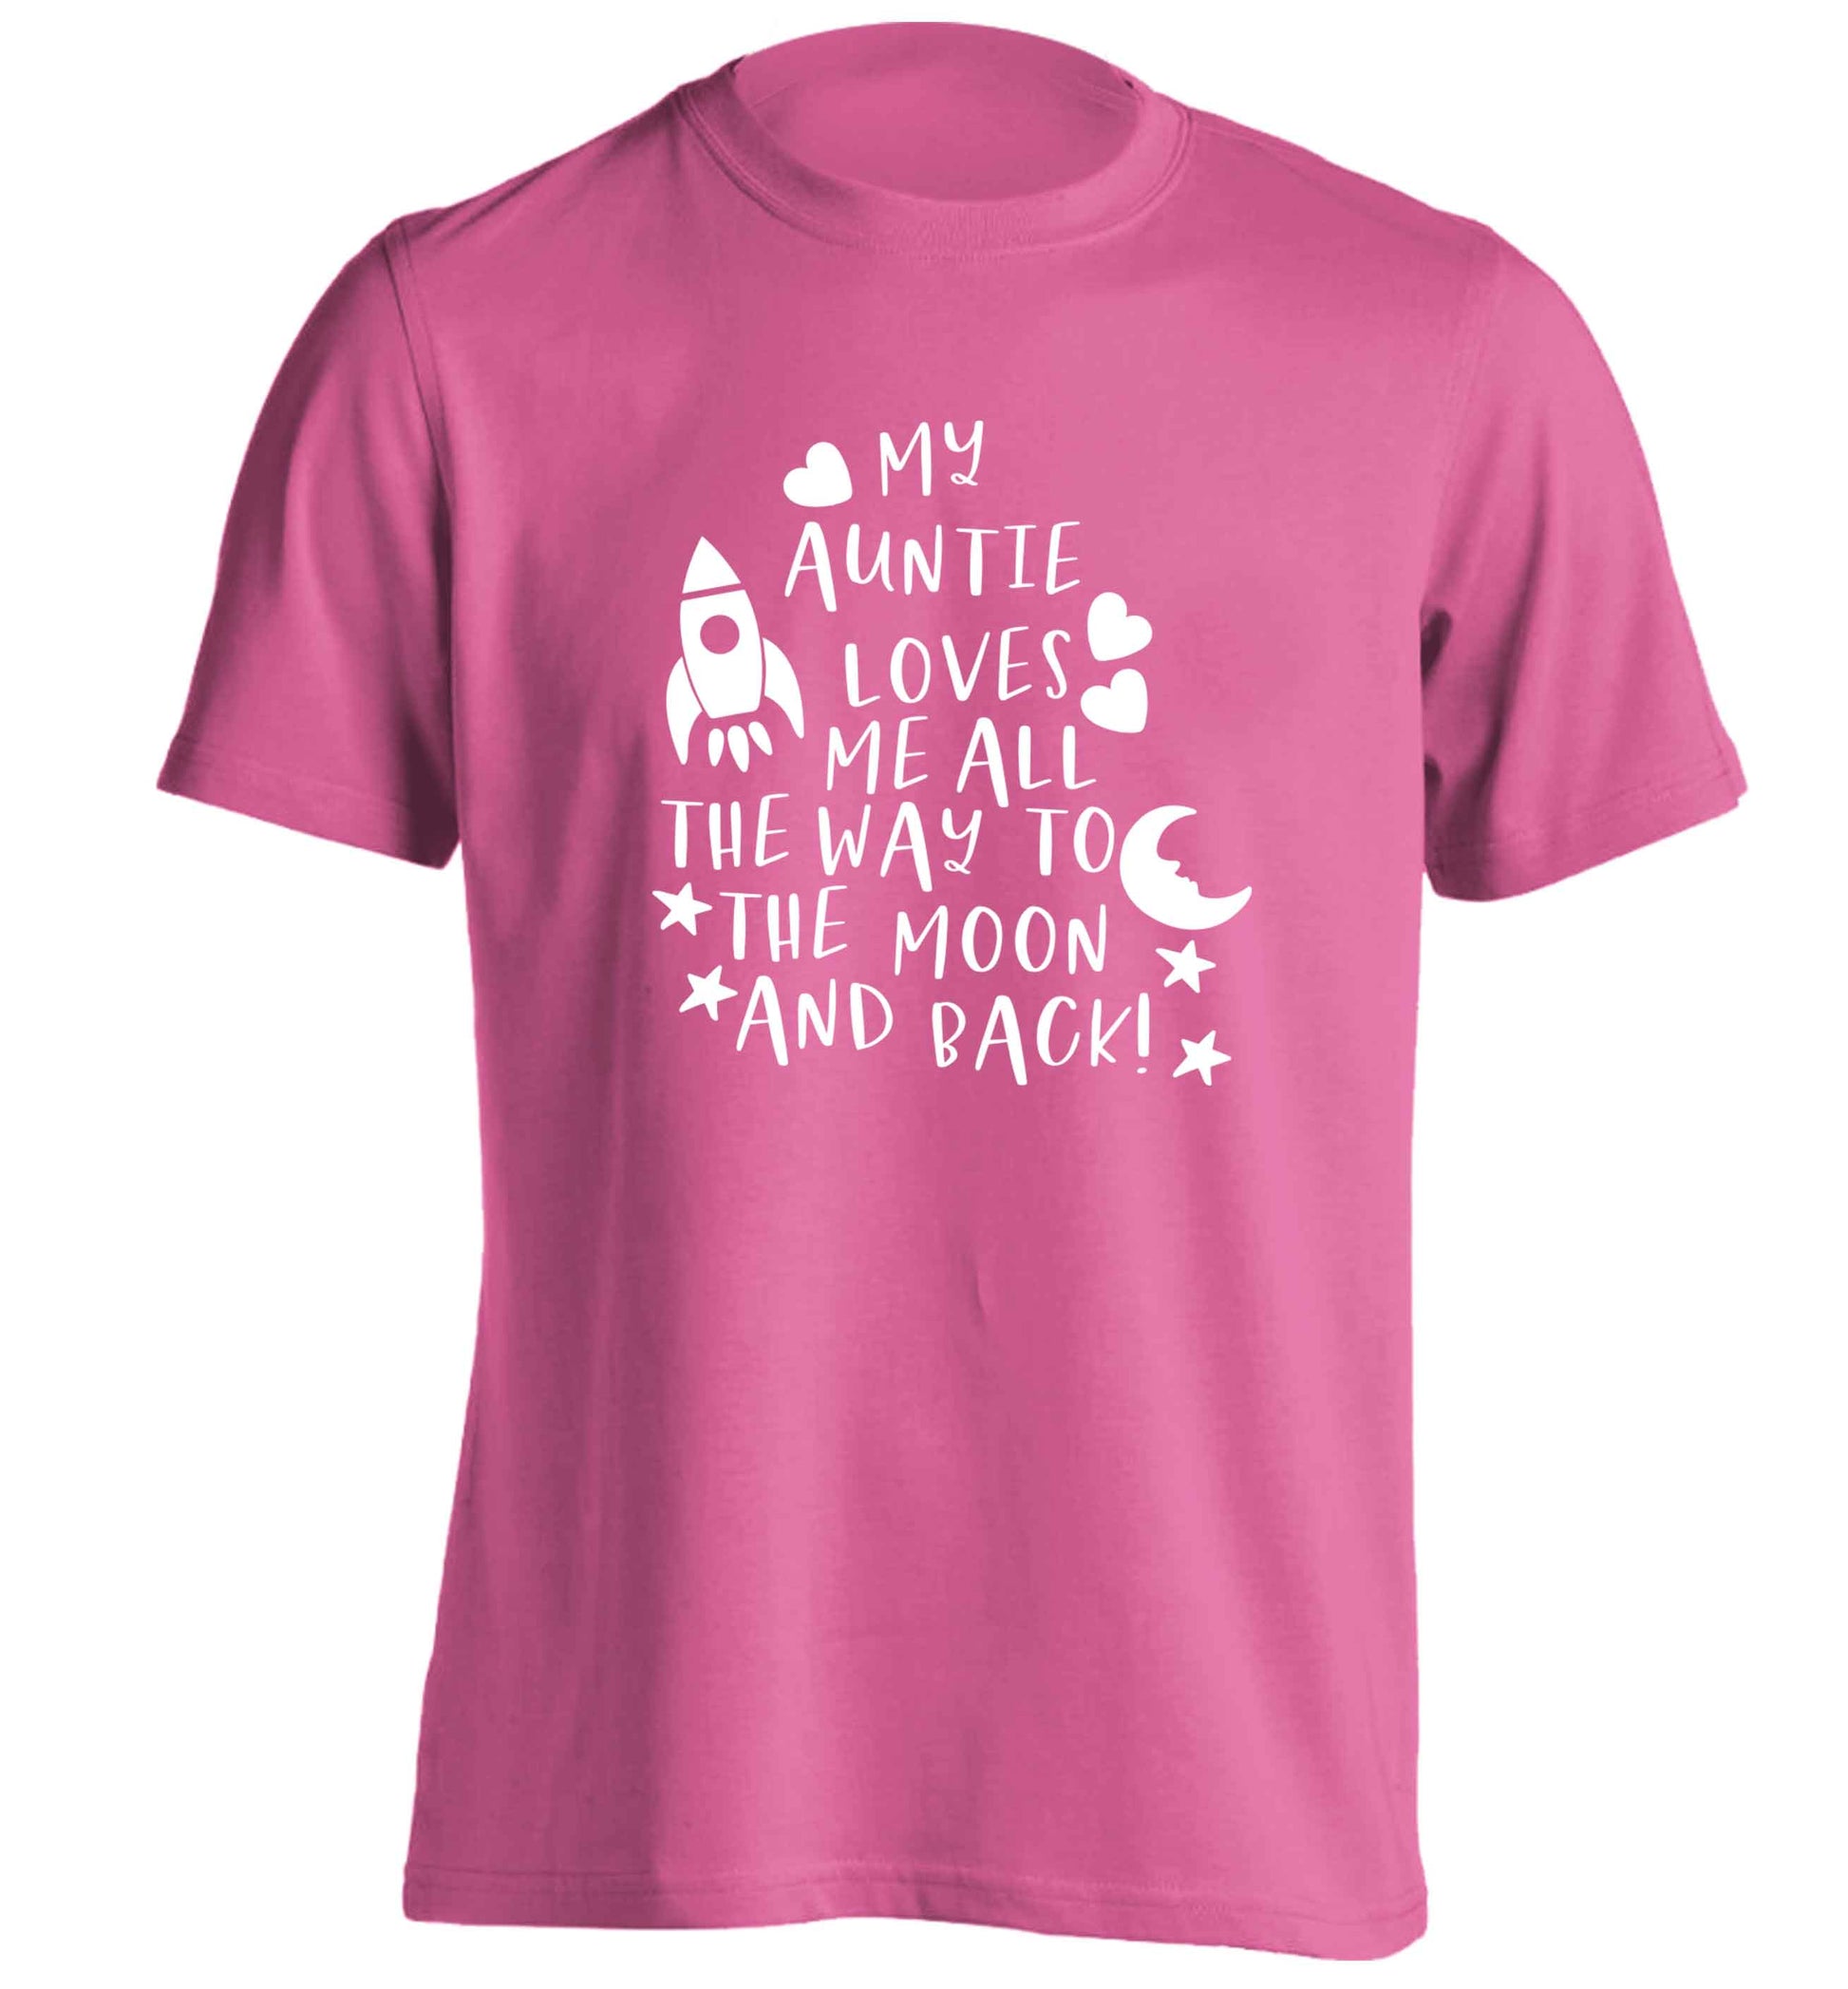 My auntie loves me all the way to the moon and back adults unisex pink Tshirt 2XL